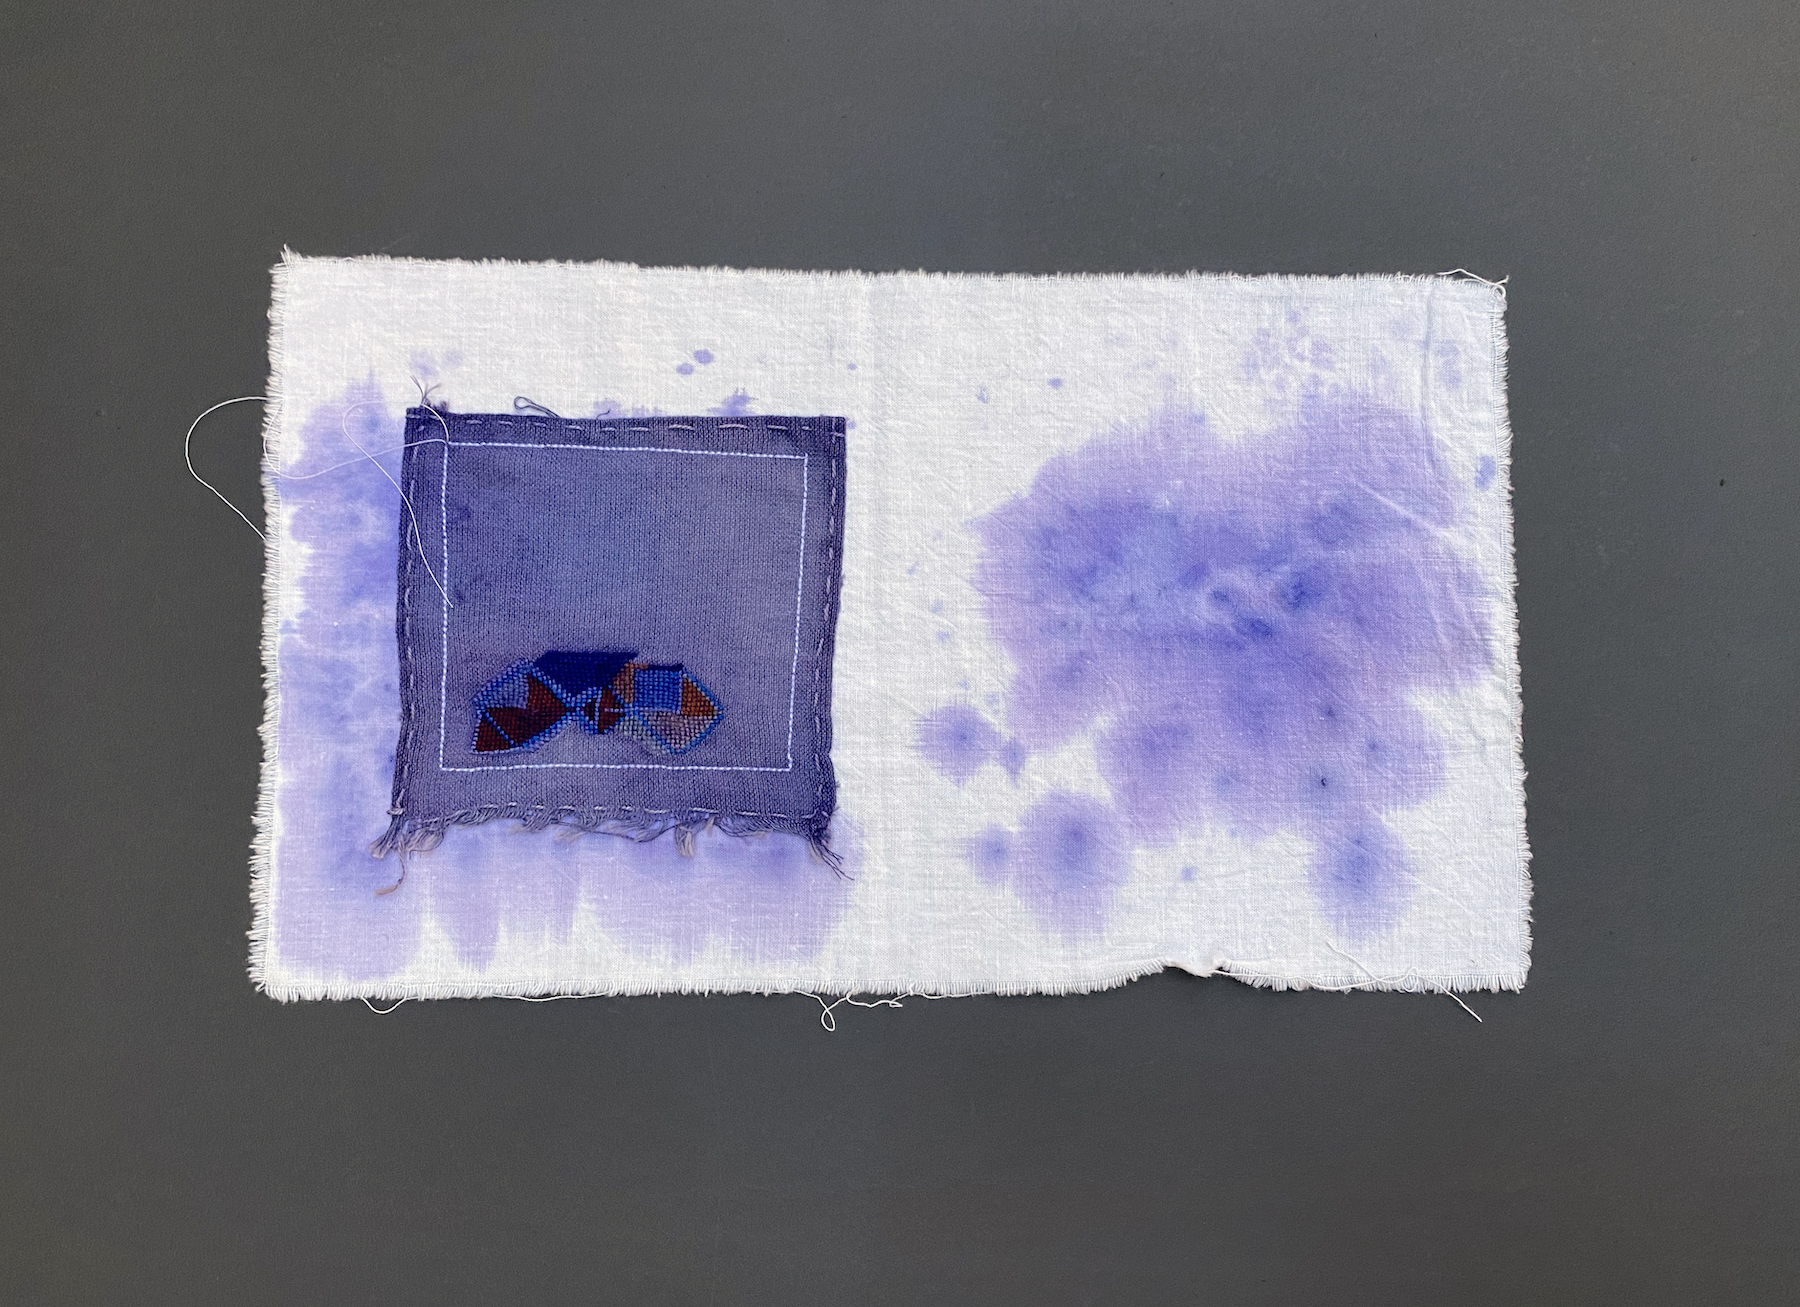 Muscle Memory, experiment (II), 2021, cotton thread on cotton fabric, indigo coloring dye.